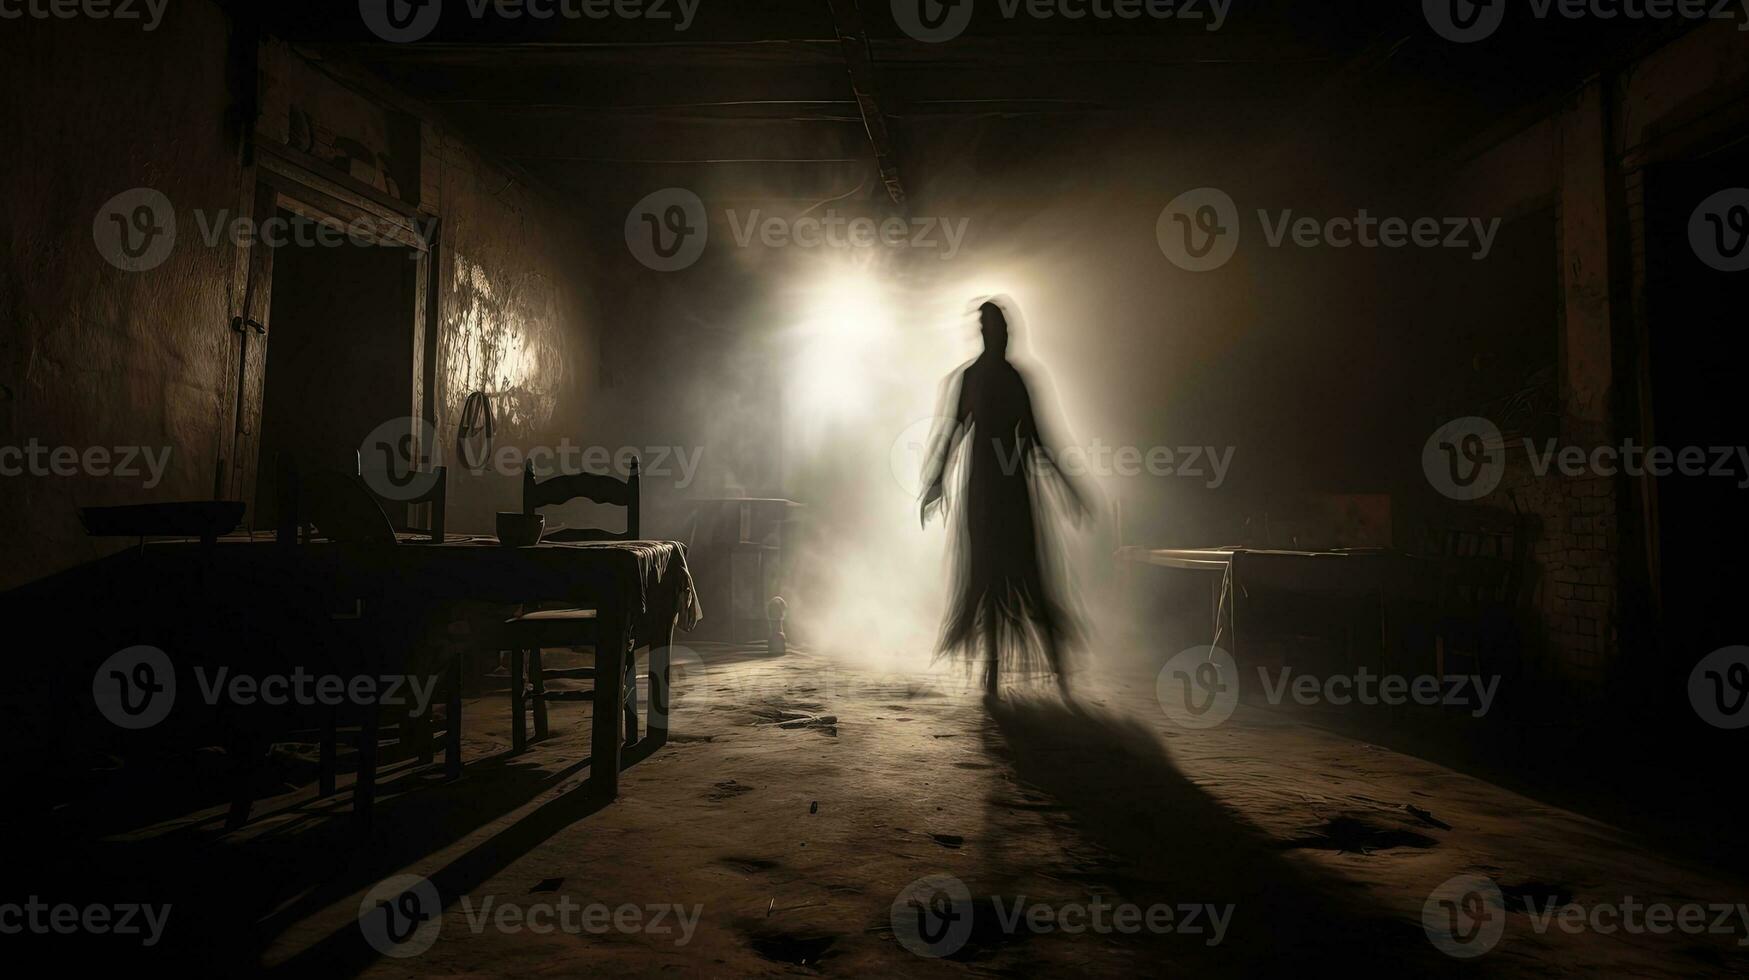 An eerie ghostly figure captured in an aged dusty cellar s photograph. silhouette concept photo